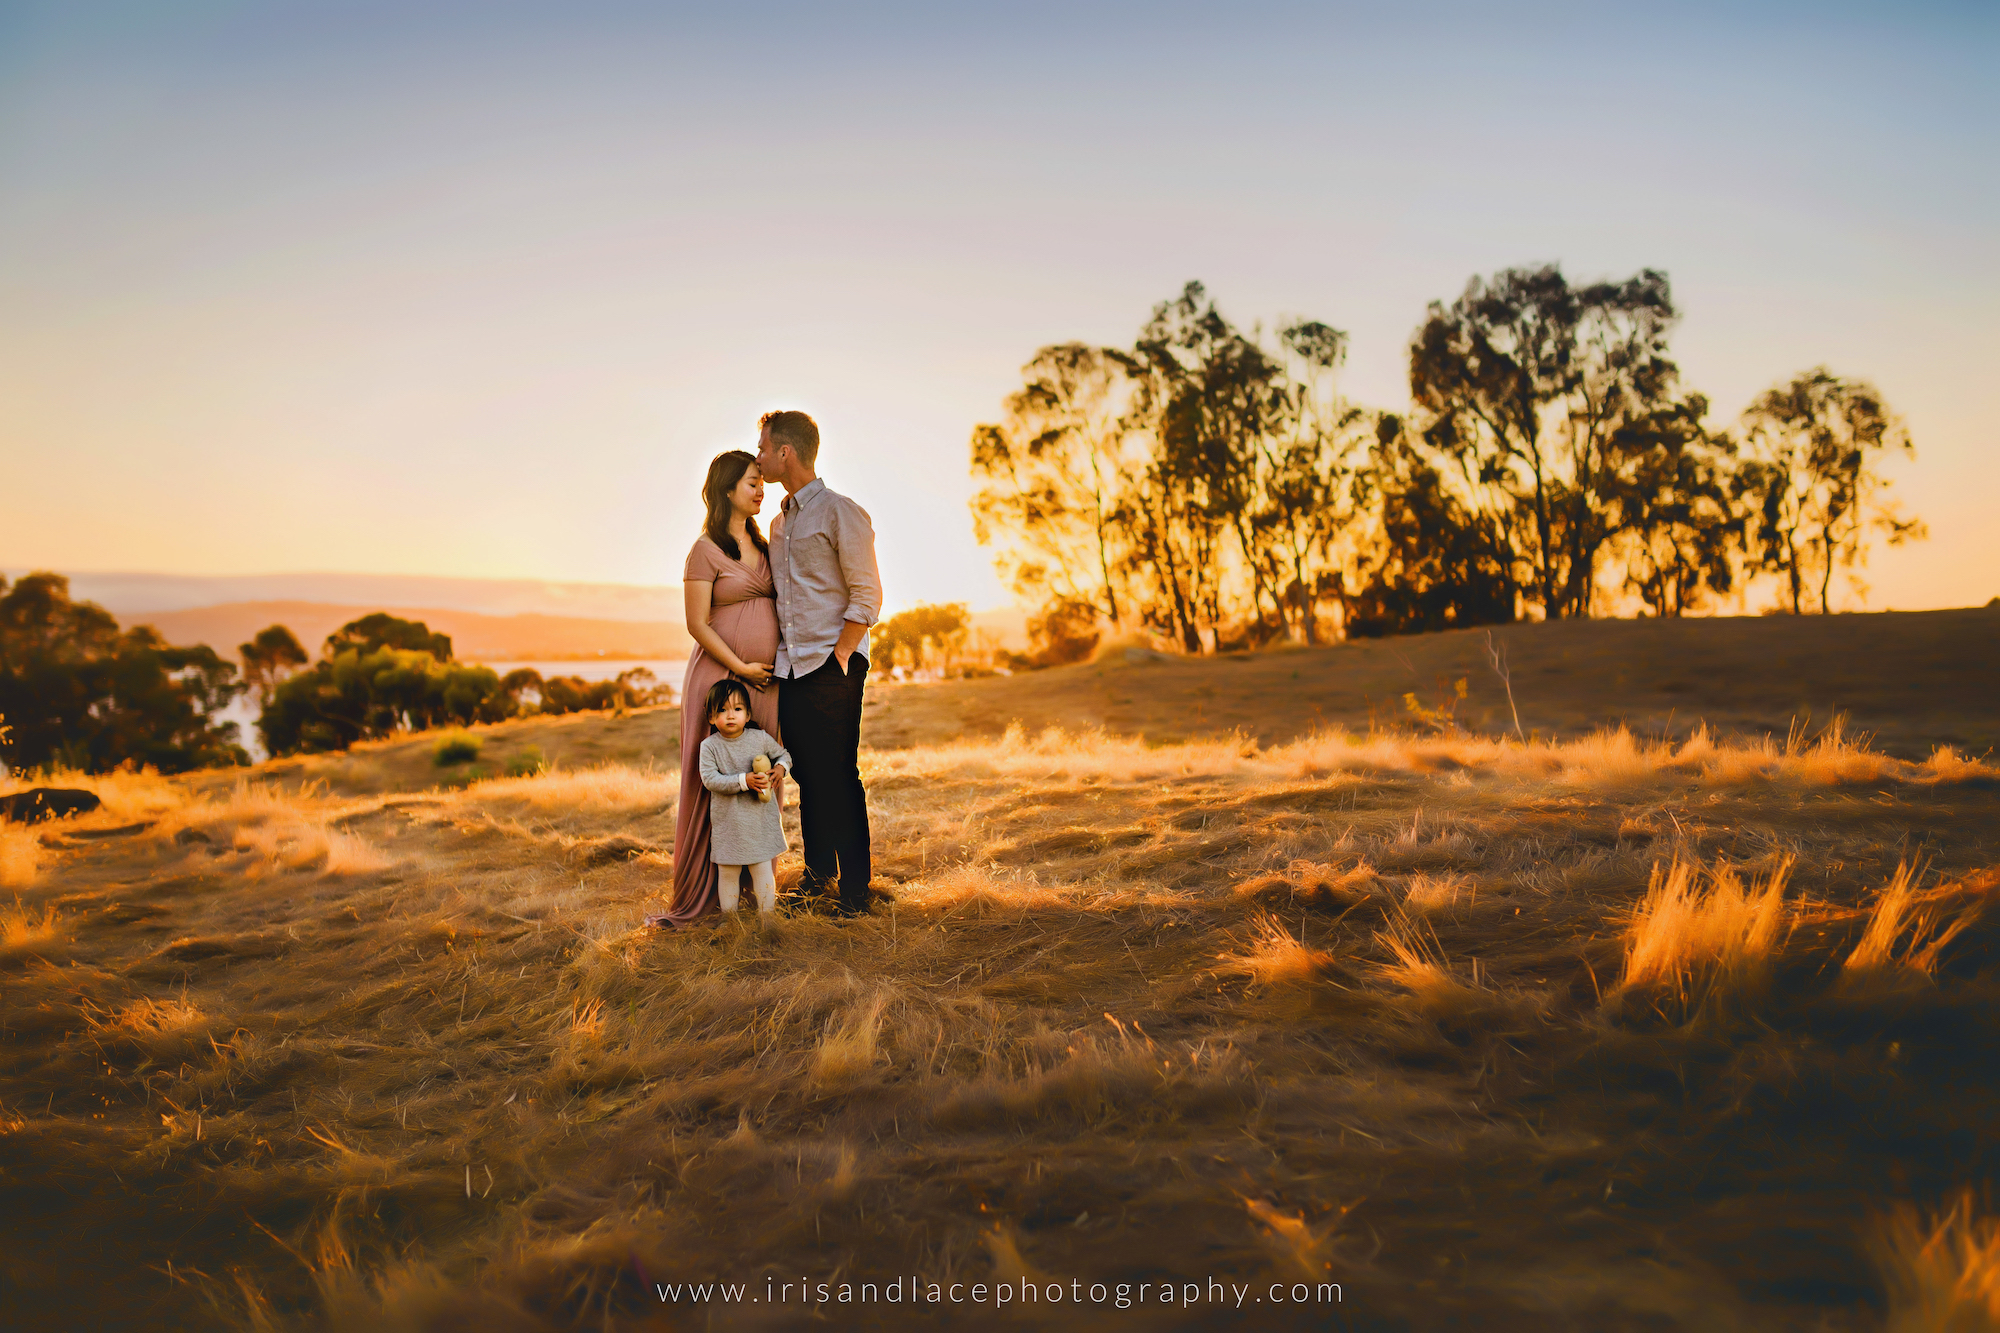 Sunset maternity photography in silicon valley